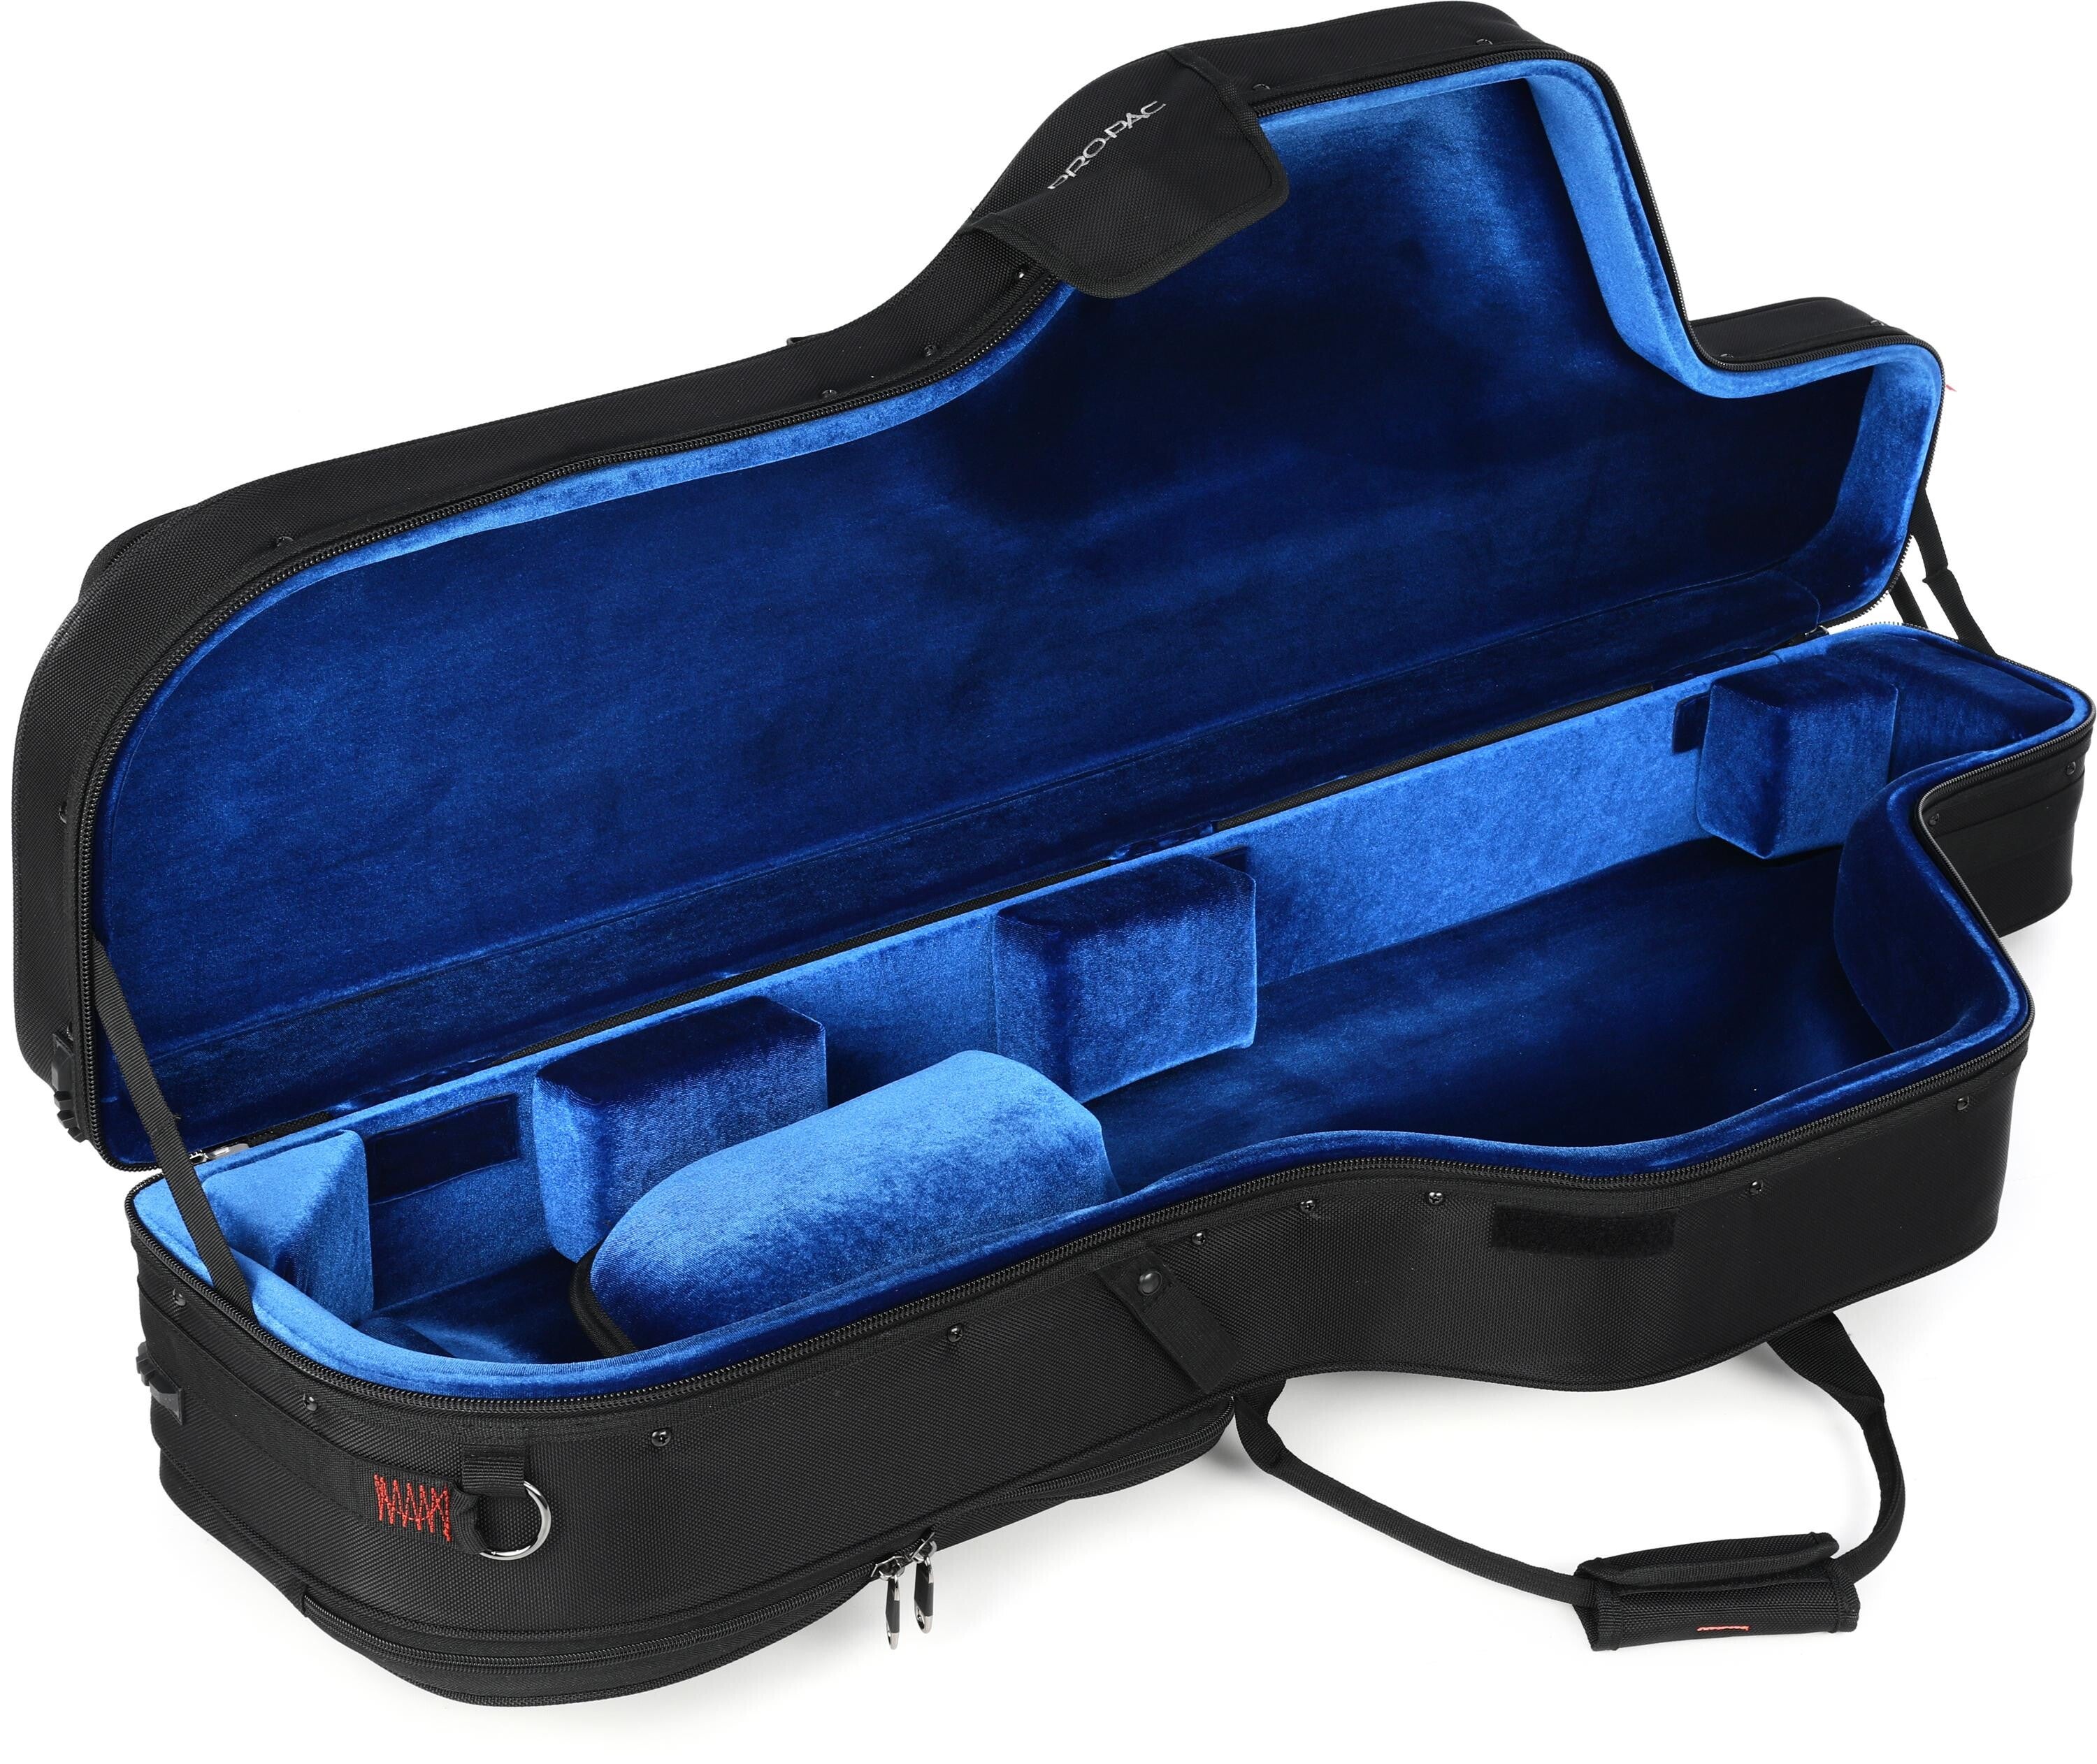 Cable Bag Music Dj Band Equipment Case Audio Bag Harness Music